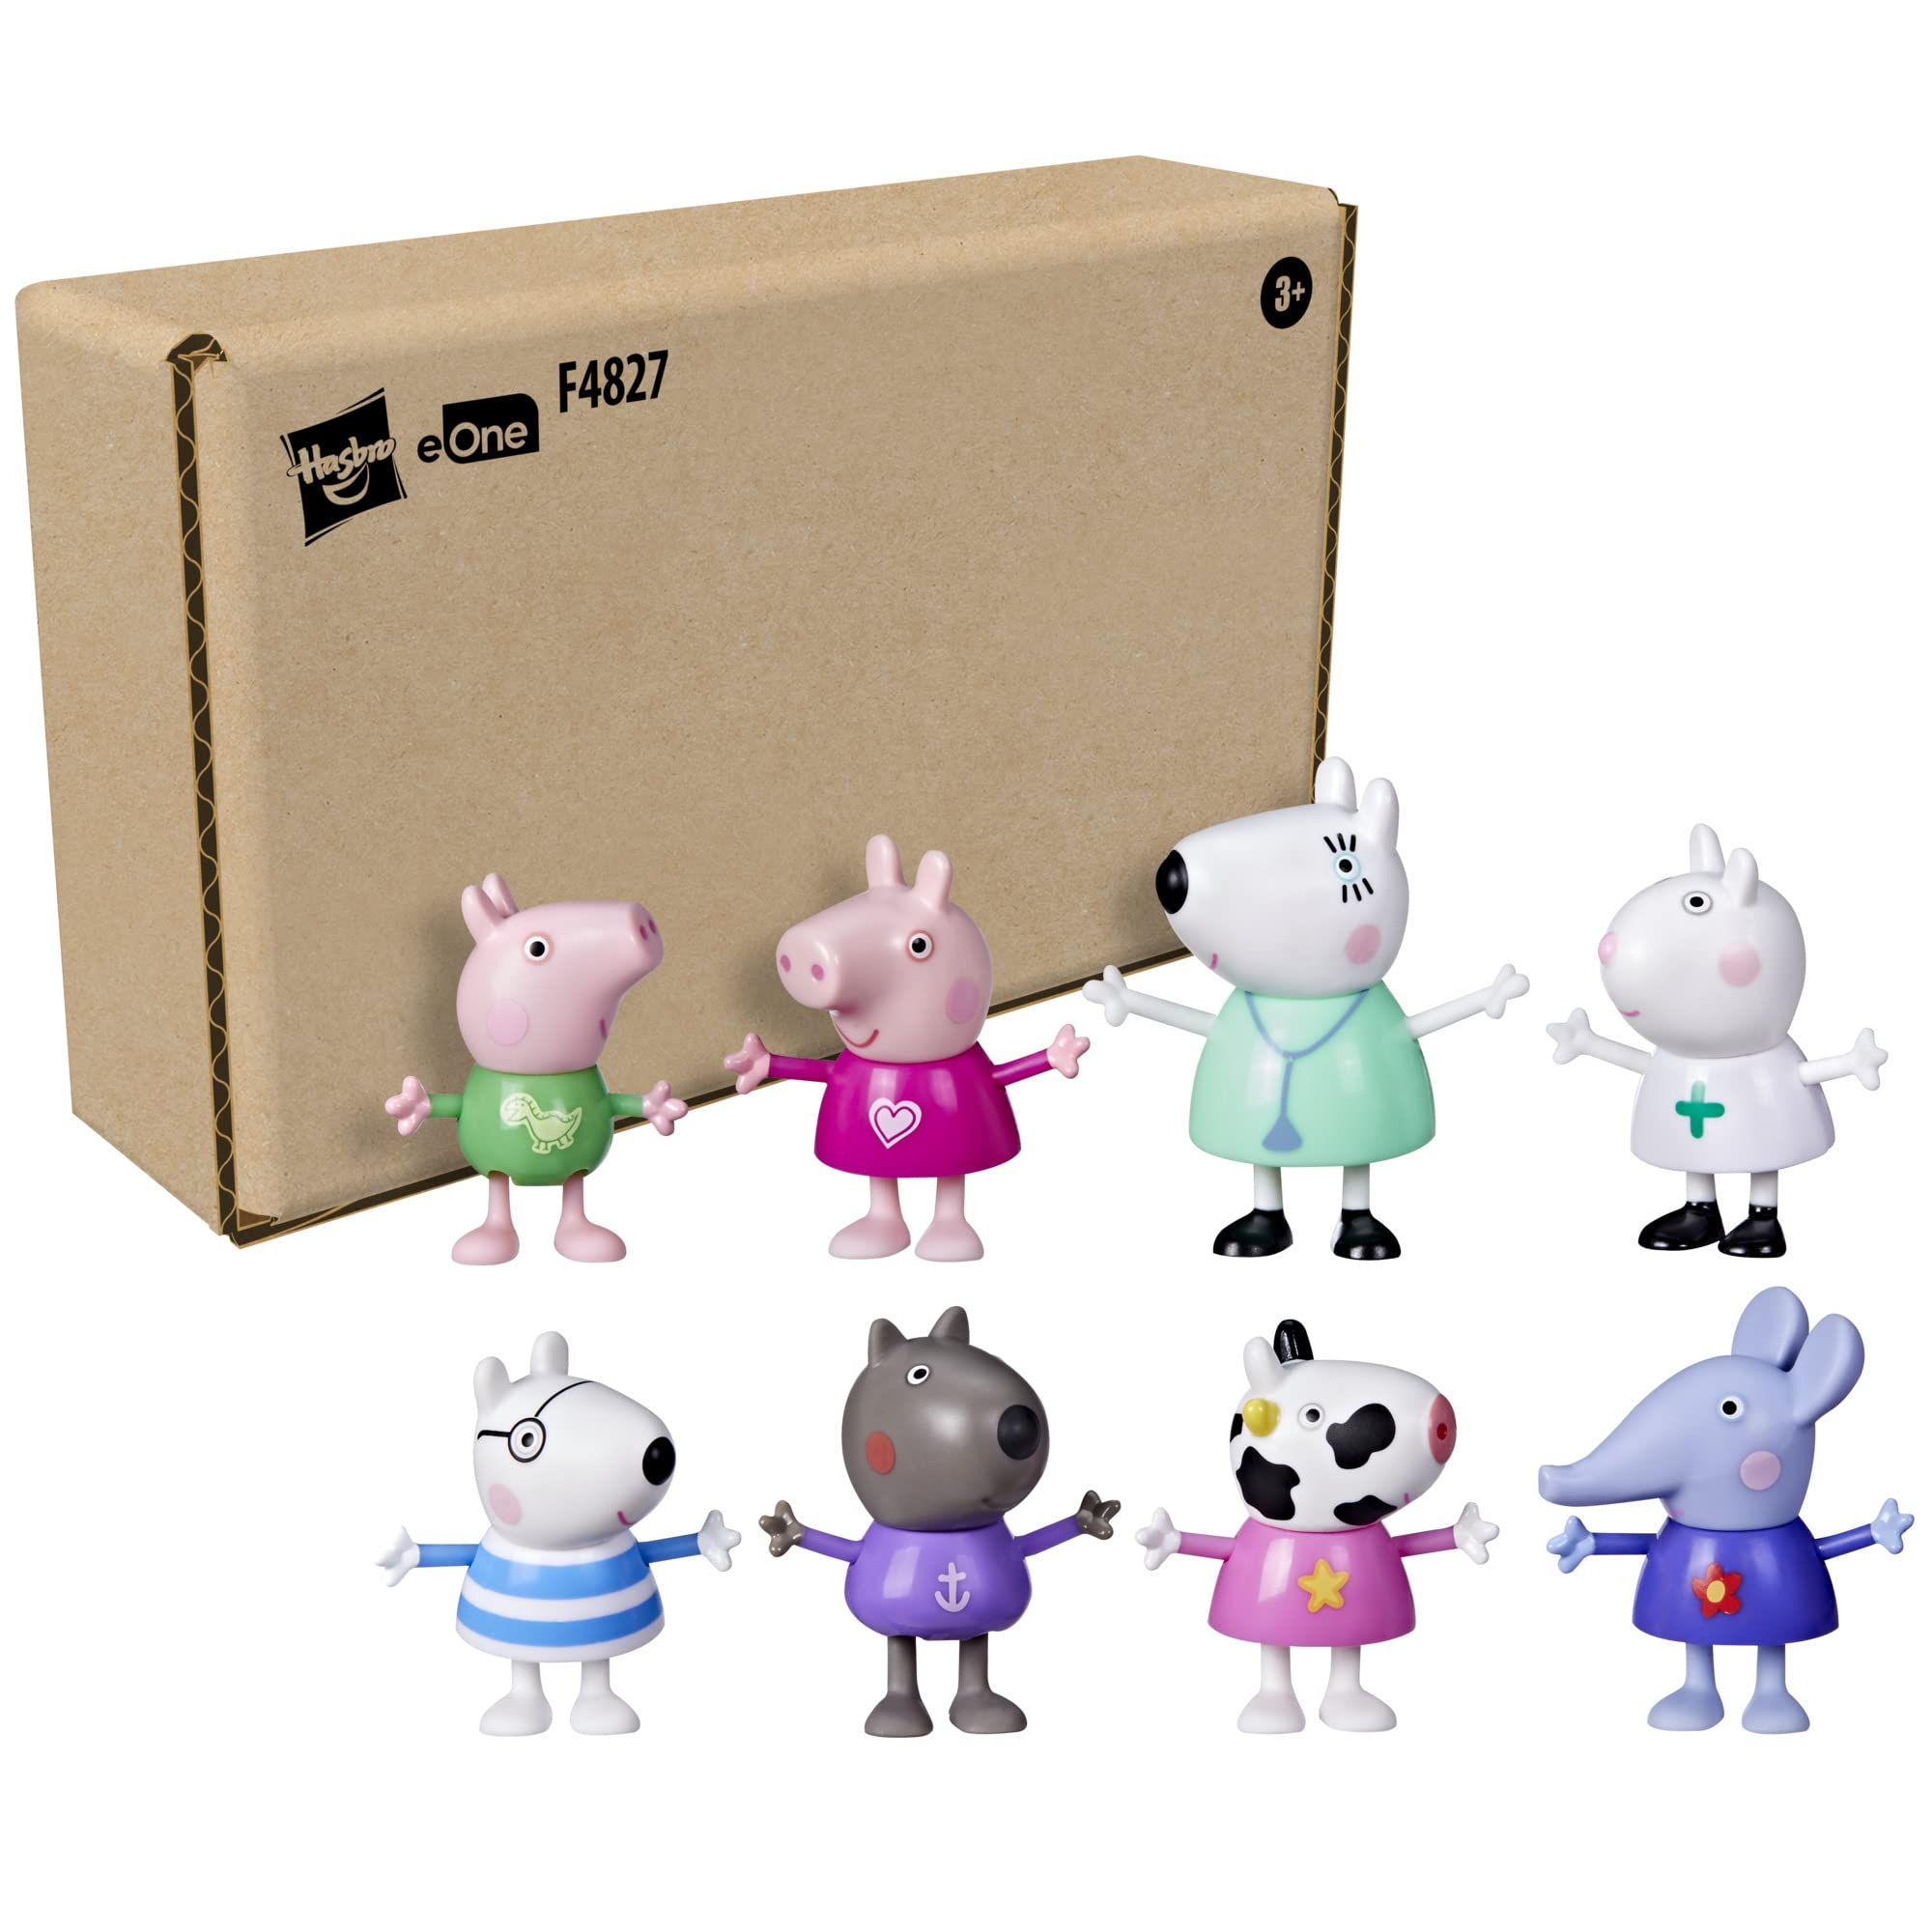 Peppa Pig Dr. Polar Bear Calls On Peppa and Friends Figure Pack Preschool Toy, Includes 8 Figures, for Ages 3 and Up (Amazon Exclusive)